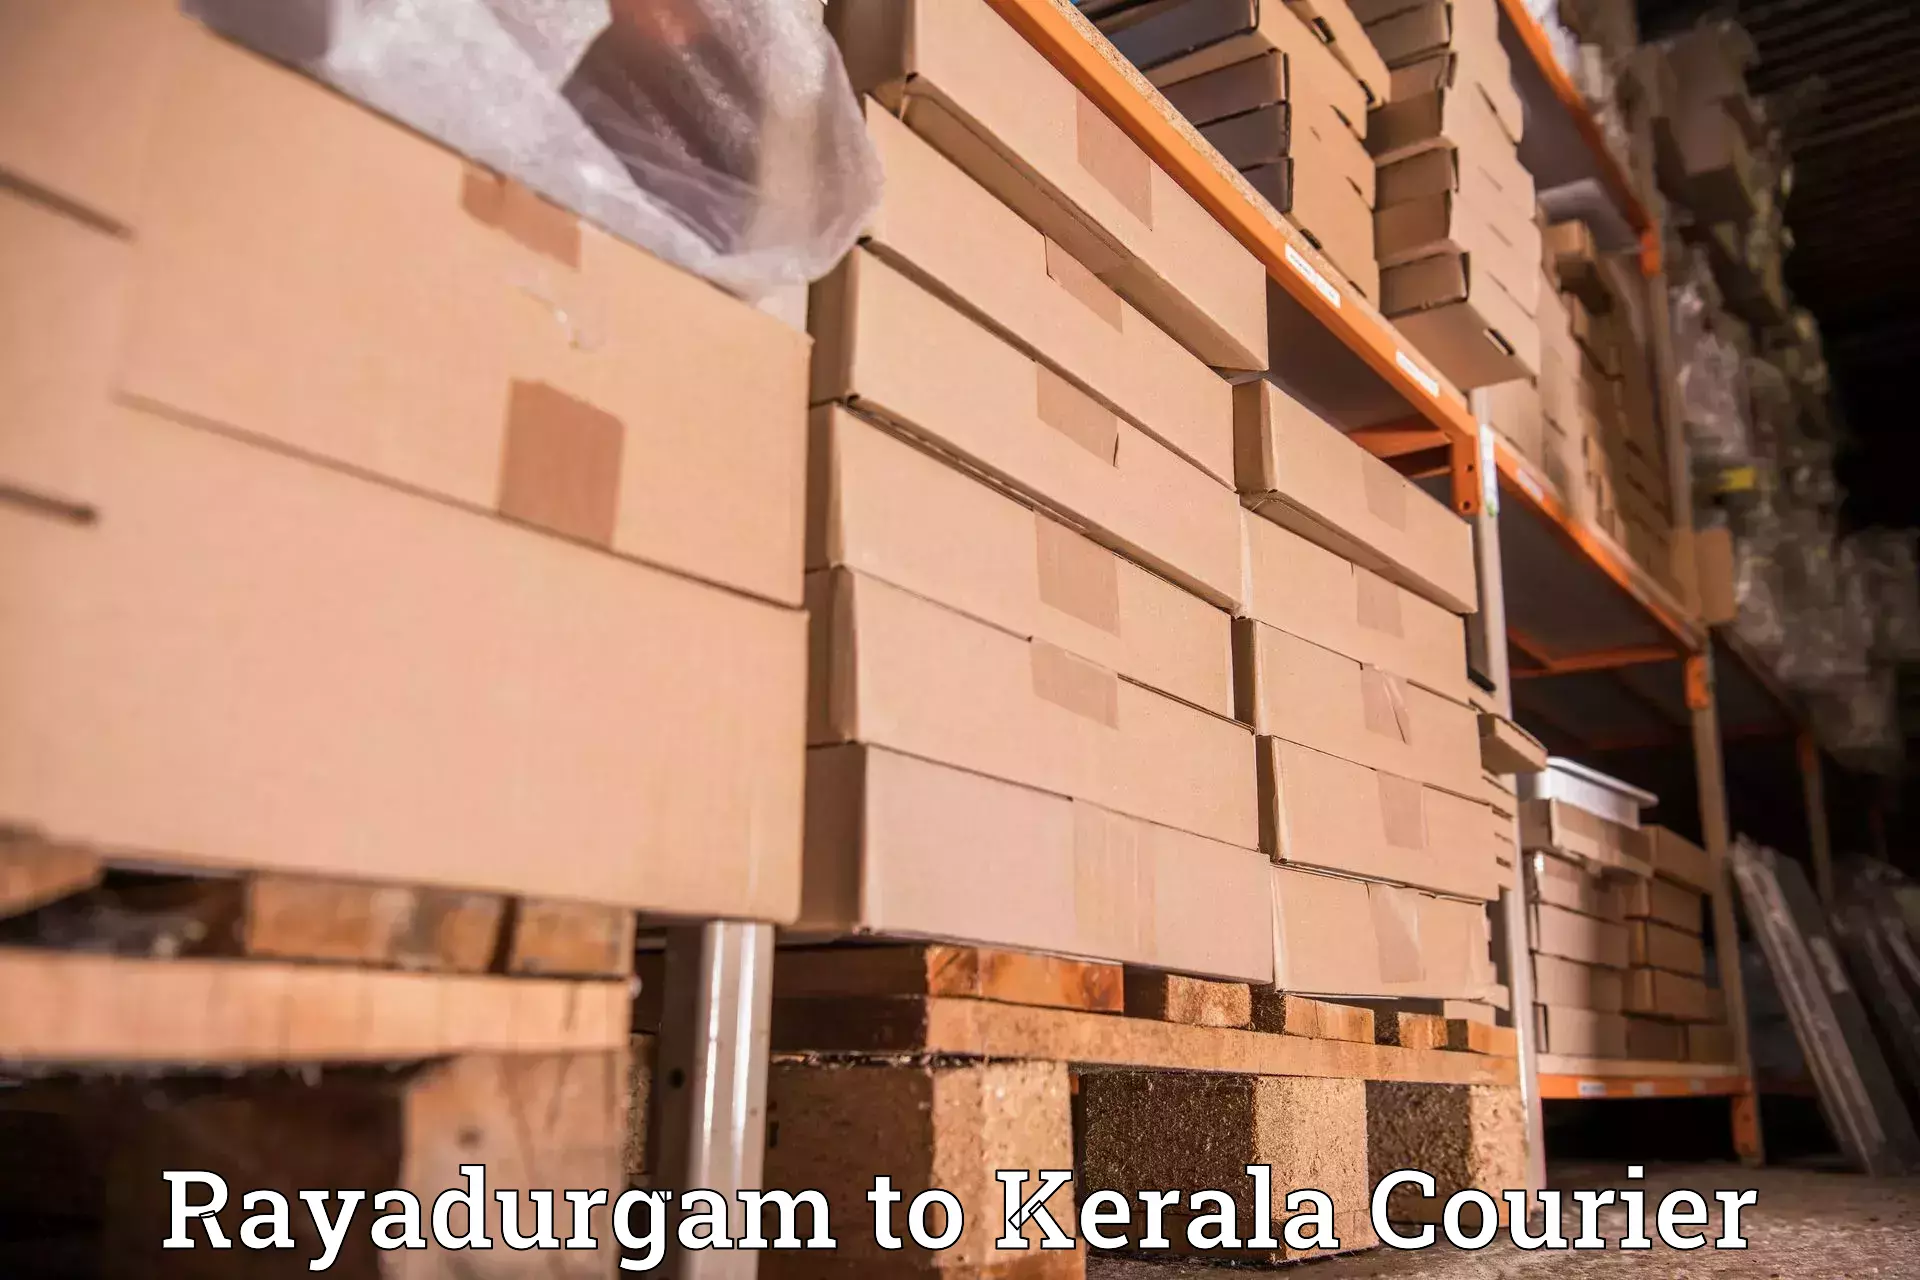 Easy access courier services Rayadurgam to Perambra